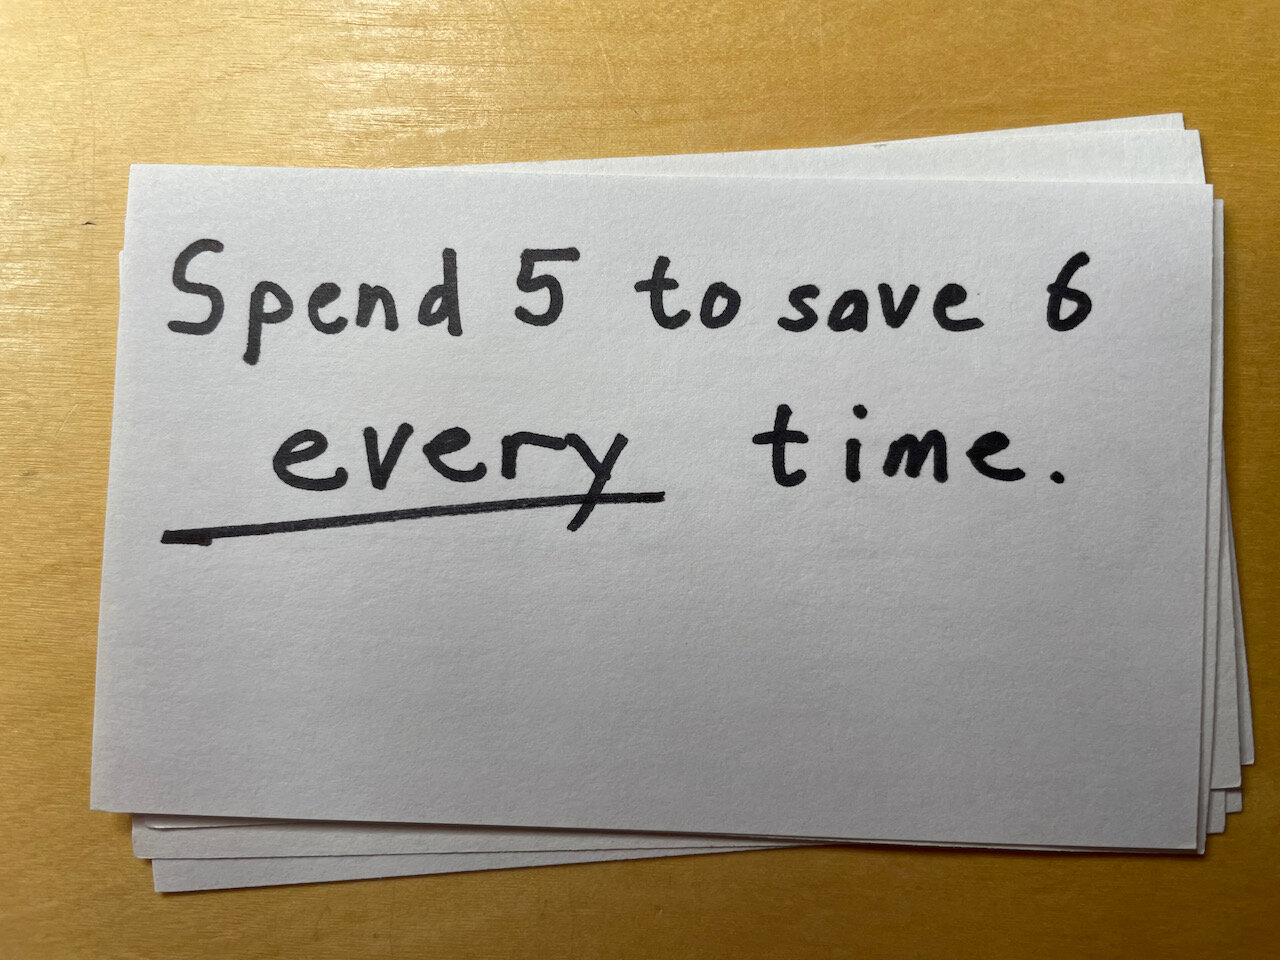 Spend 5 to get 6 every time.